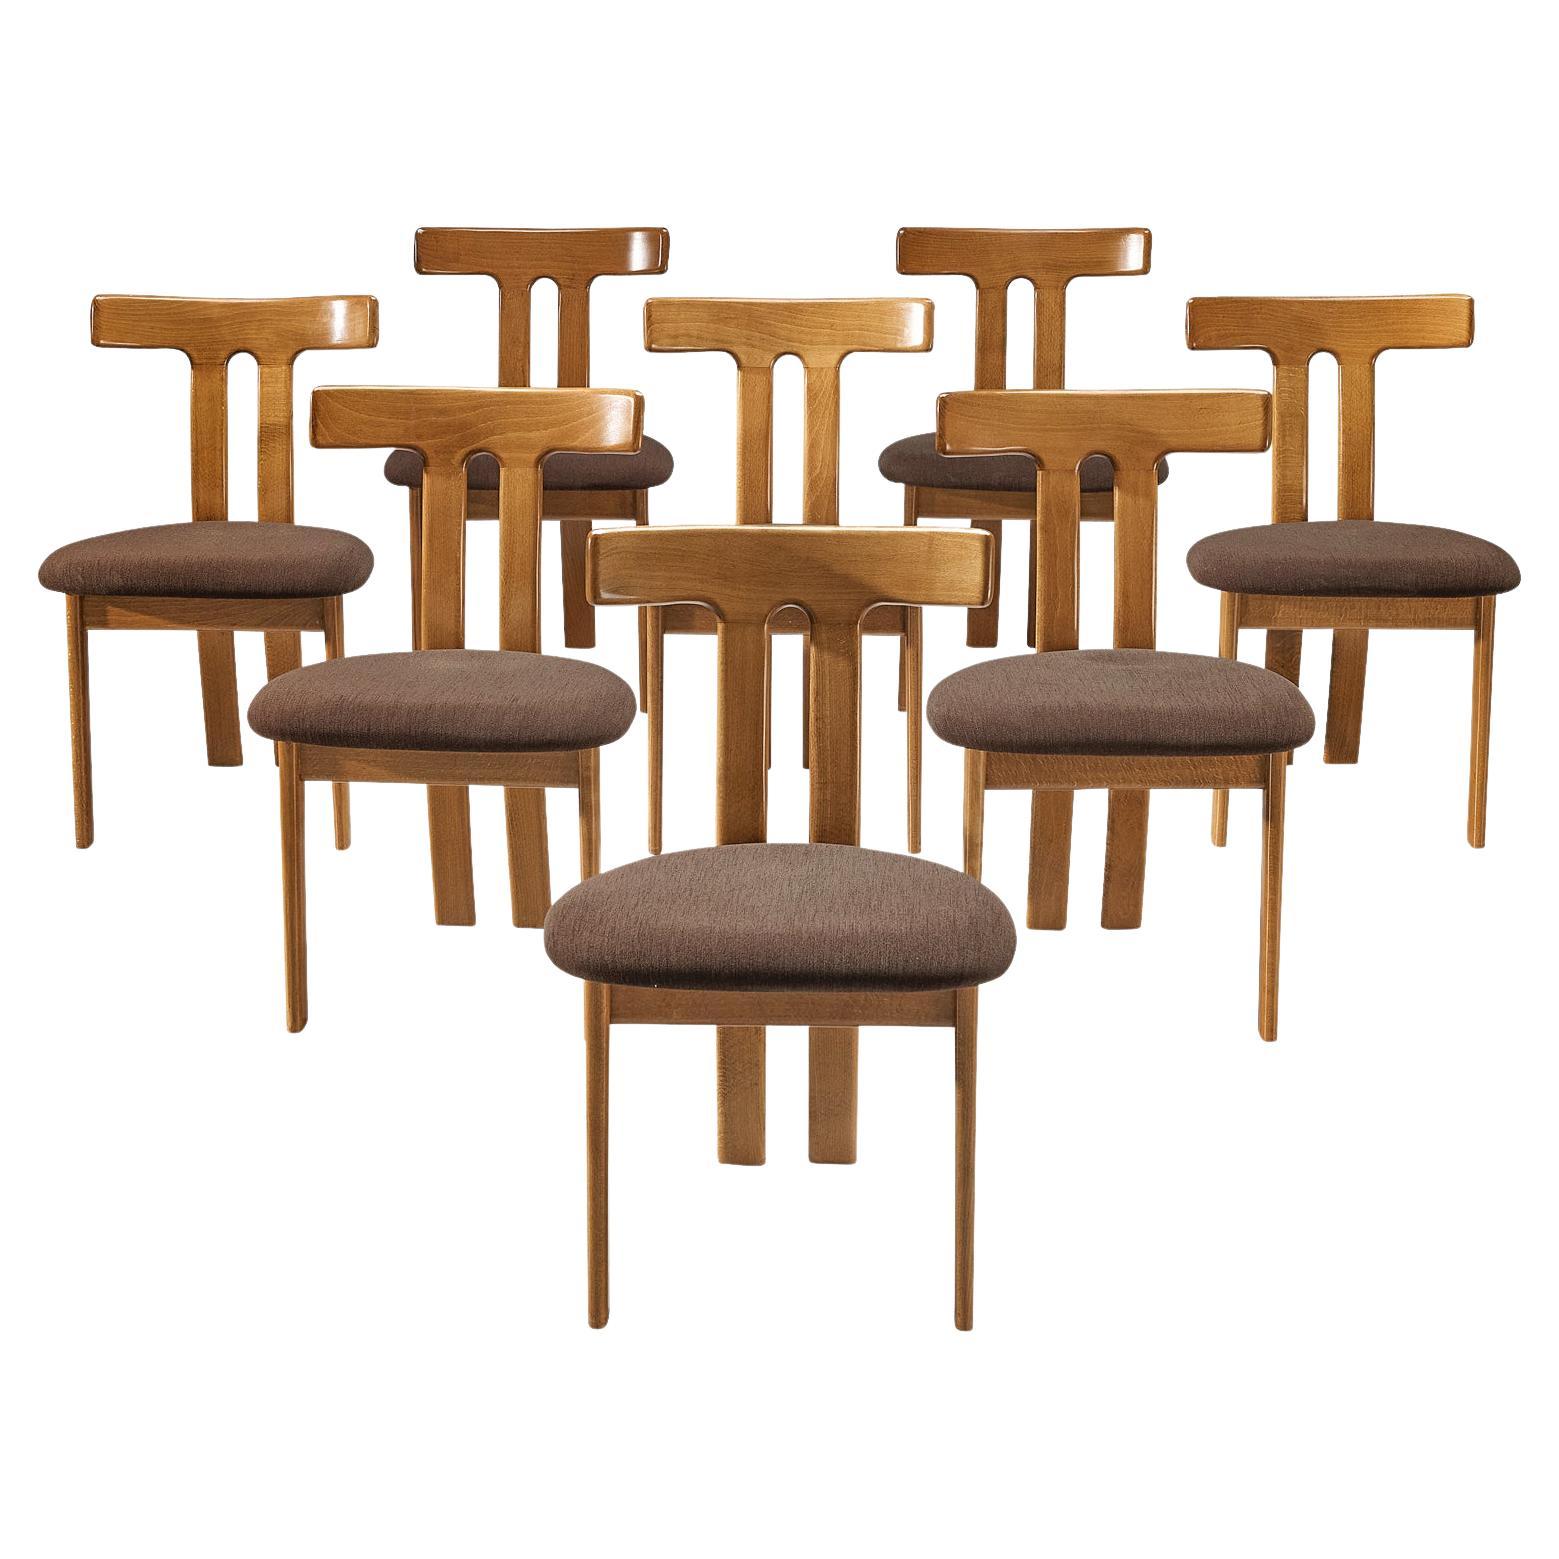 Set of Eight 'T-shape' Dining Chairs in Brown Upholstery